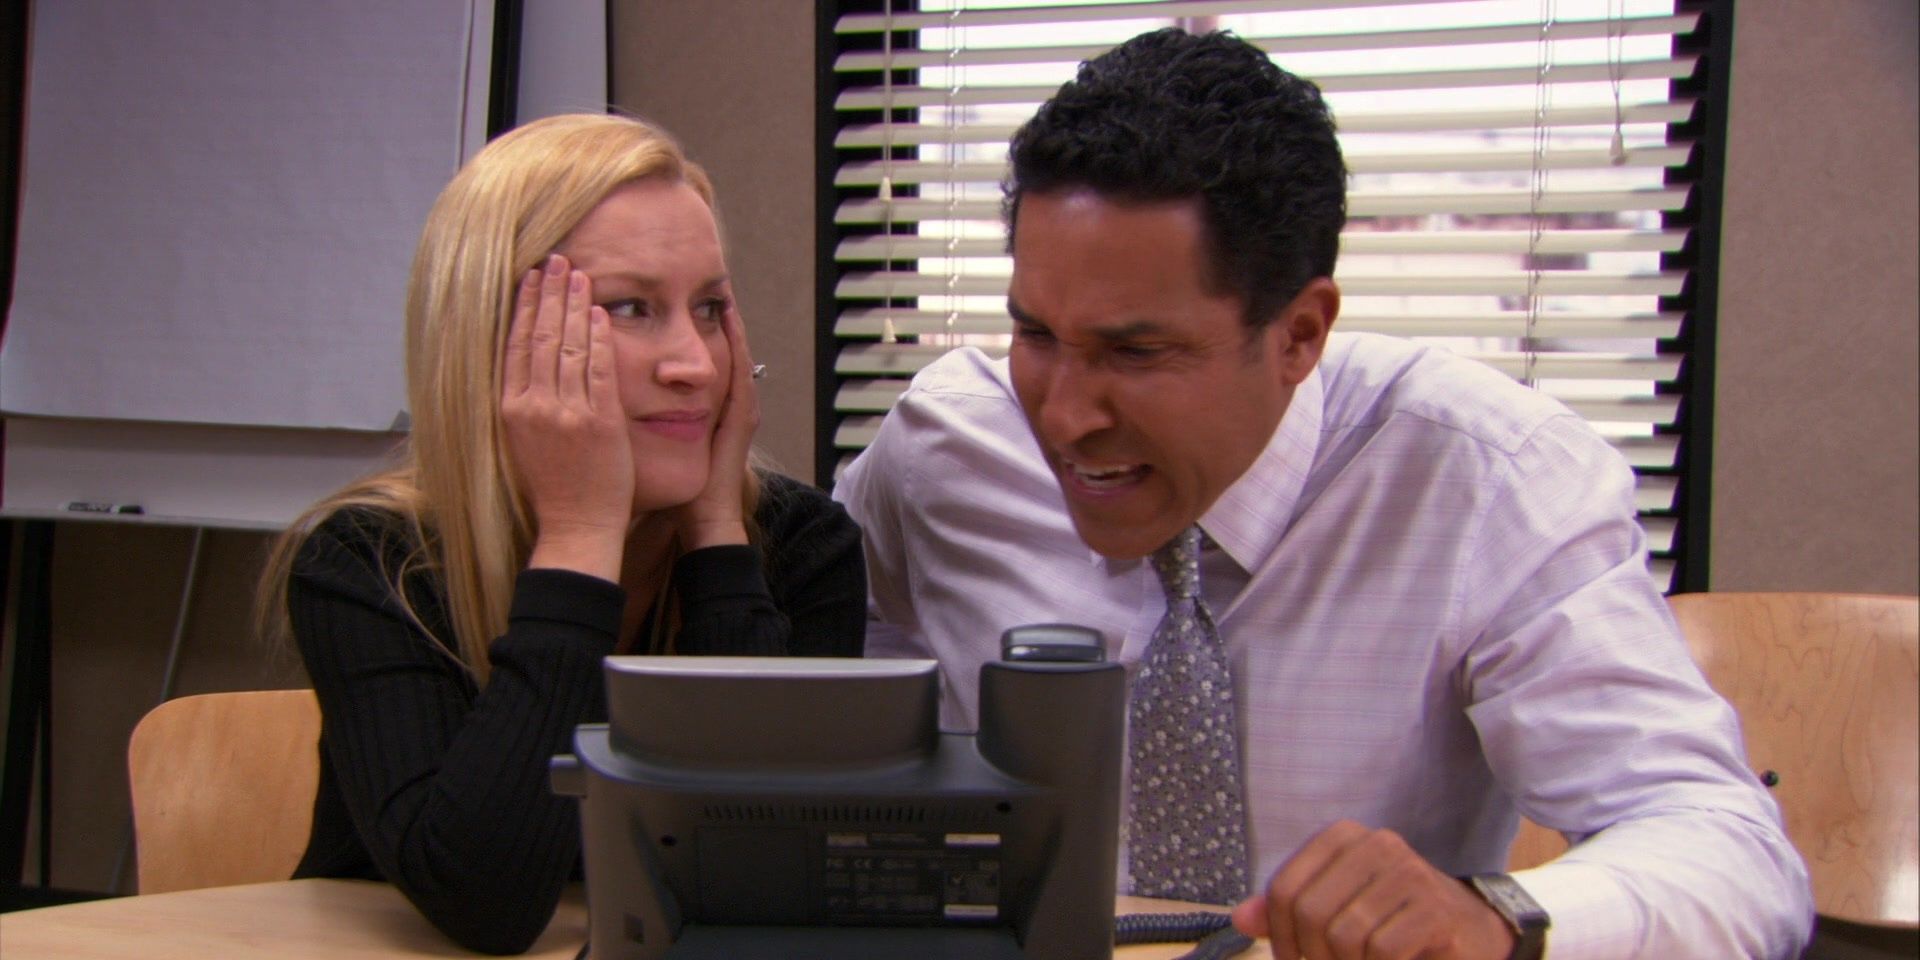 Oscar and Angela screaming into a phone in The Office.